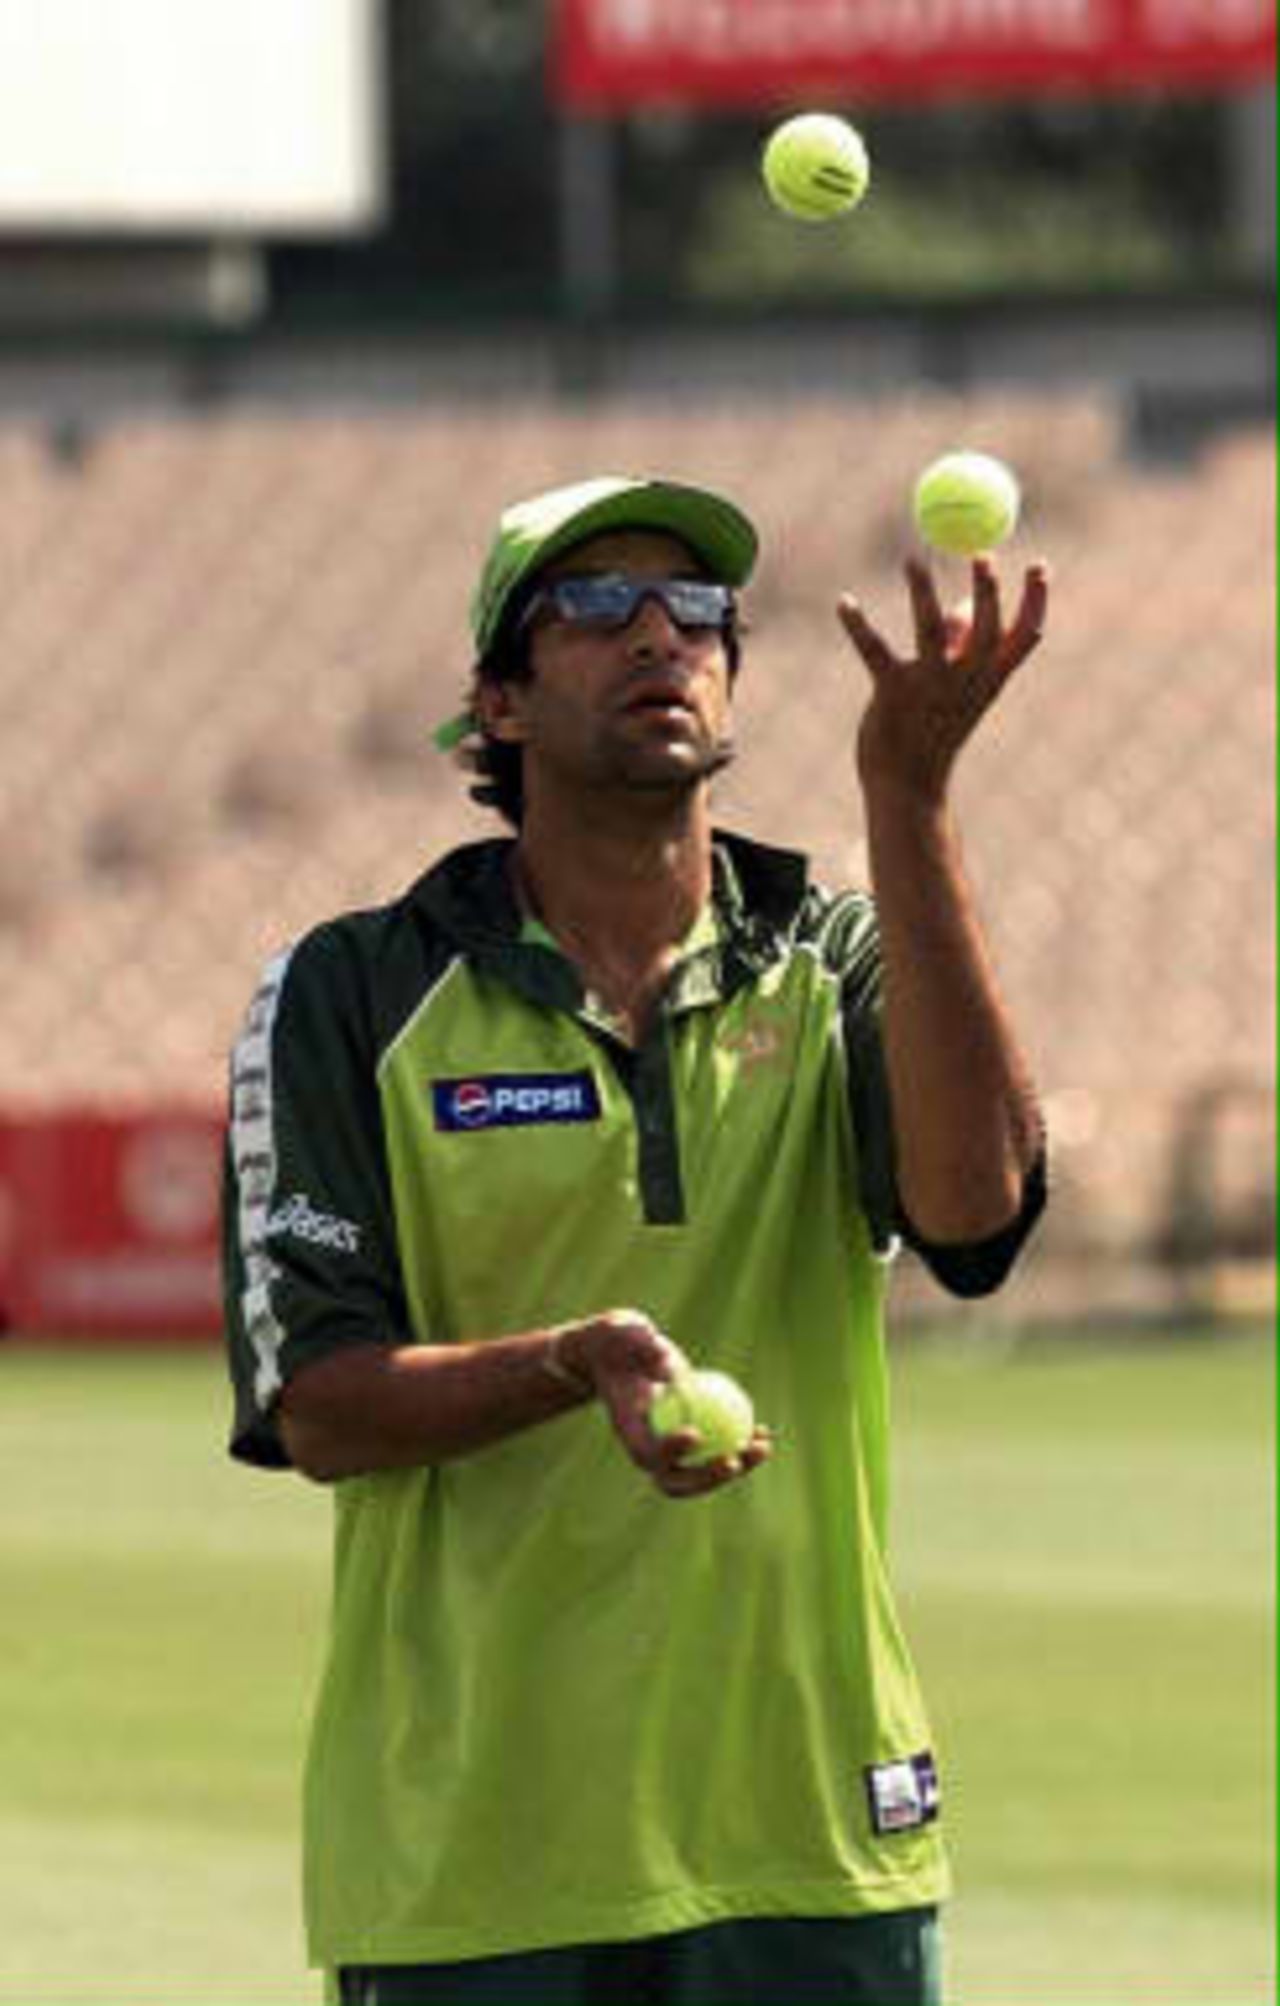 Pakistan captain Wasim Akram juggles with tennis balls during a nets practice session at Old Trafford, Manchester, 15 June 1999 prior to his sides Cricket World Cup semi-final match against New Zealand 16 June 1999